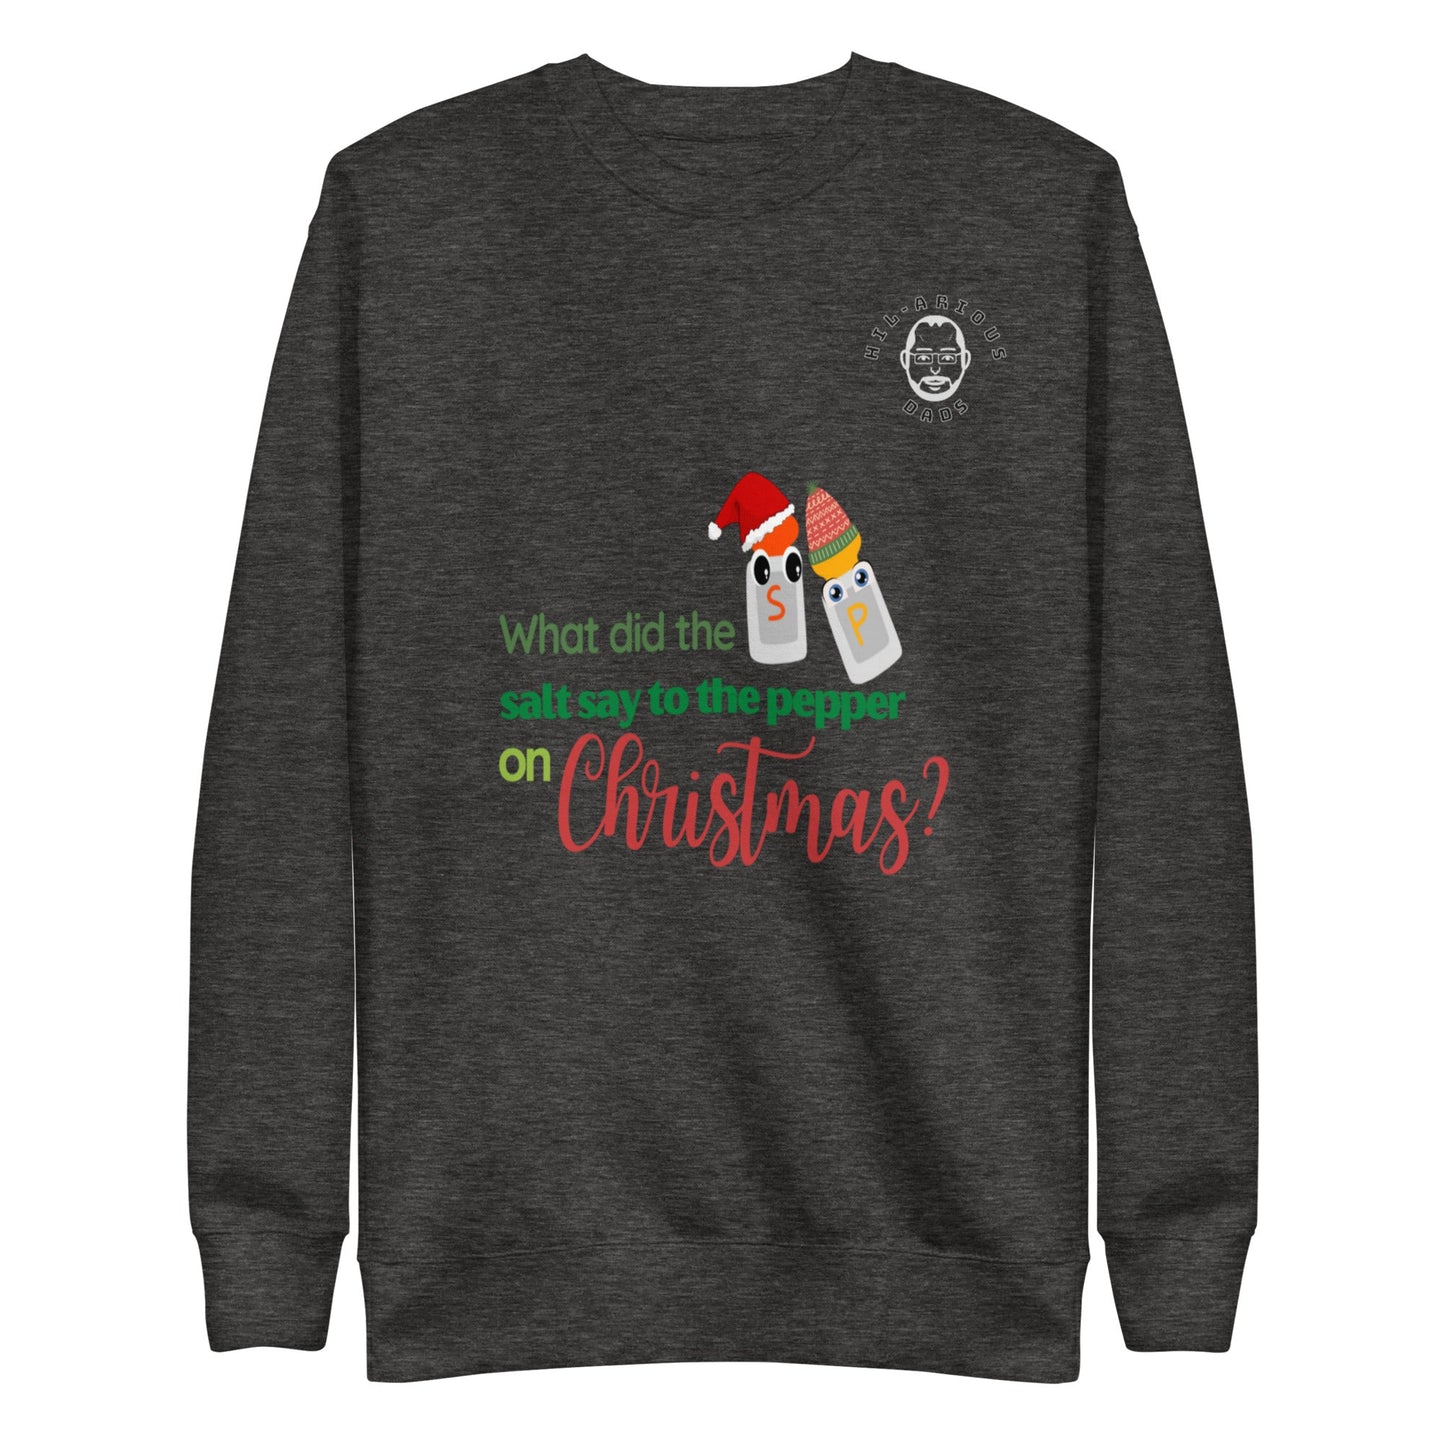 What did the salt say to the pepper on Christmas?-Sweatshirt - Hil-arious Dads